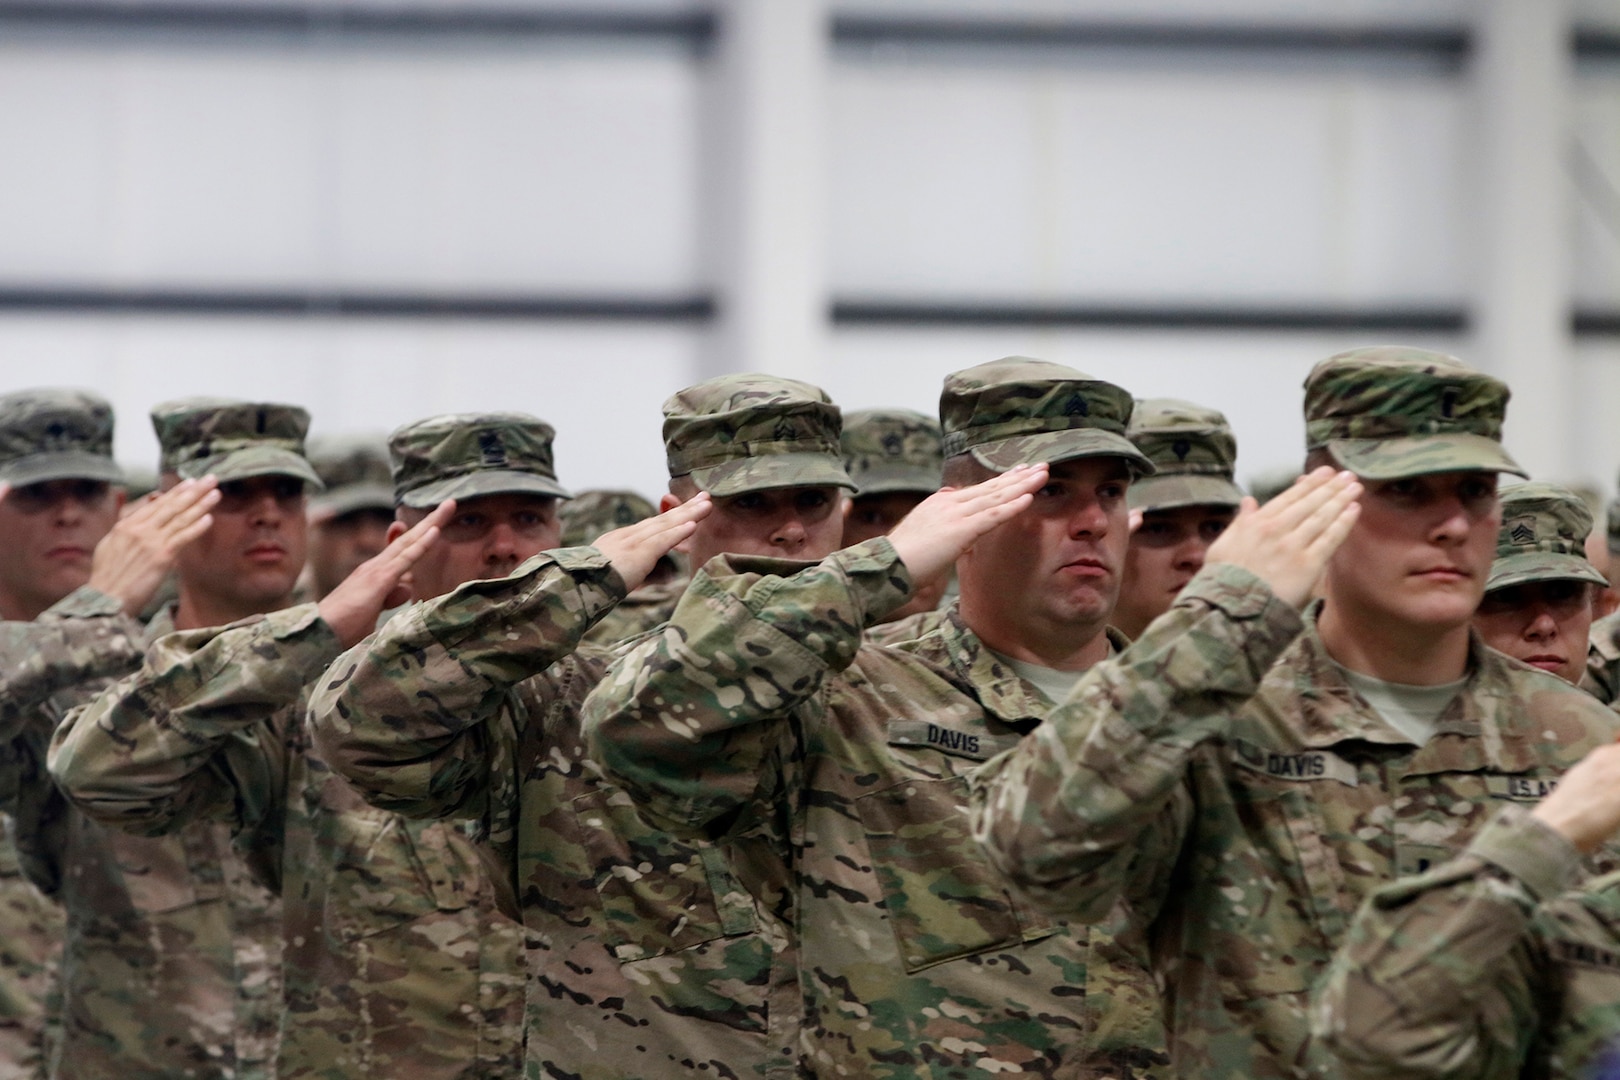 Soldiers from 2nd Battalion, 162nd Infantry Regiment, Oregon Army National Guard, render a salute during the National Anthem at  their demobilization ceremony in Albany, Oregon, June 13. The 2-162nd Infantry Battalion spent approximately 10-months in Kabul, Afghanistan, performing various security duties and training Afghan National Police forces. 